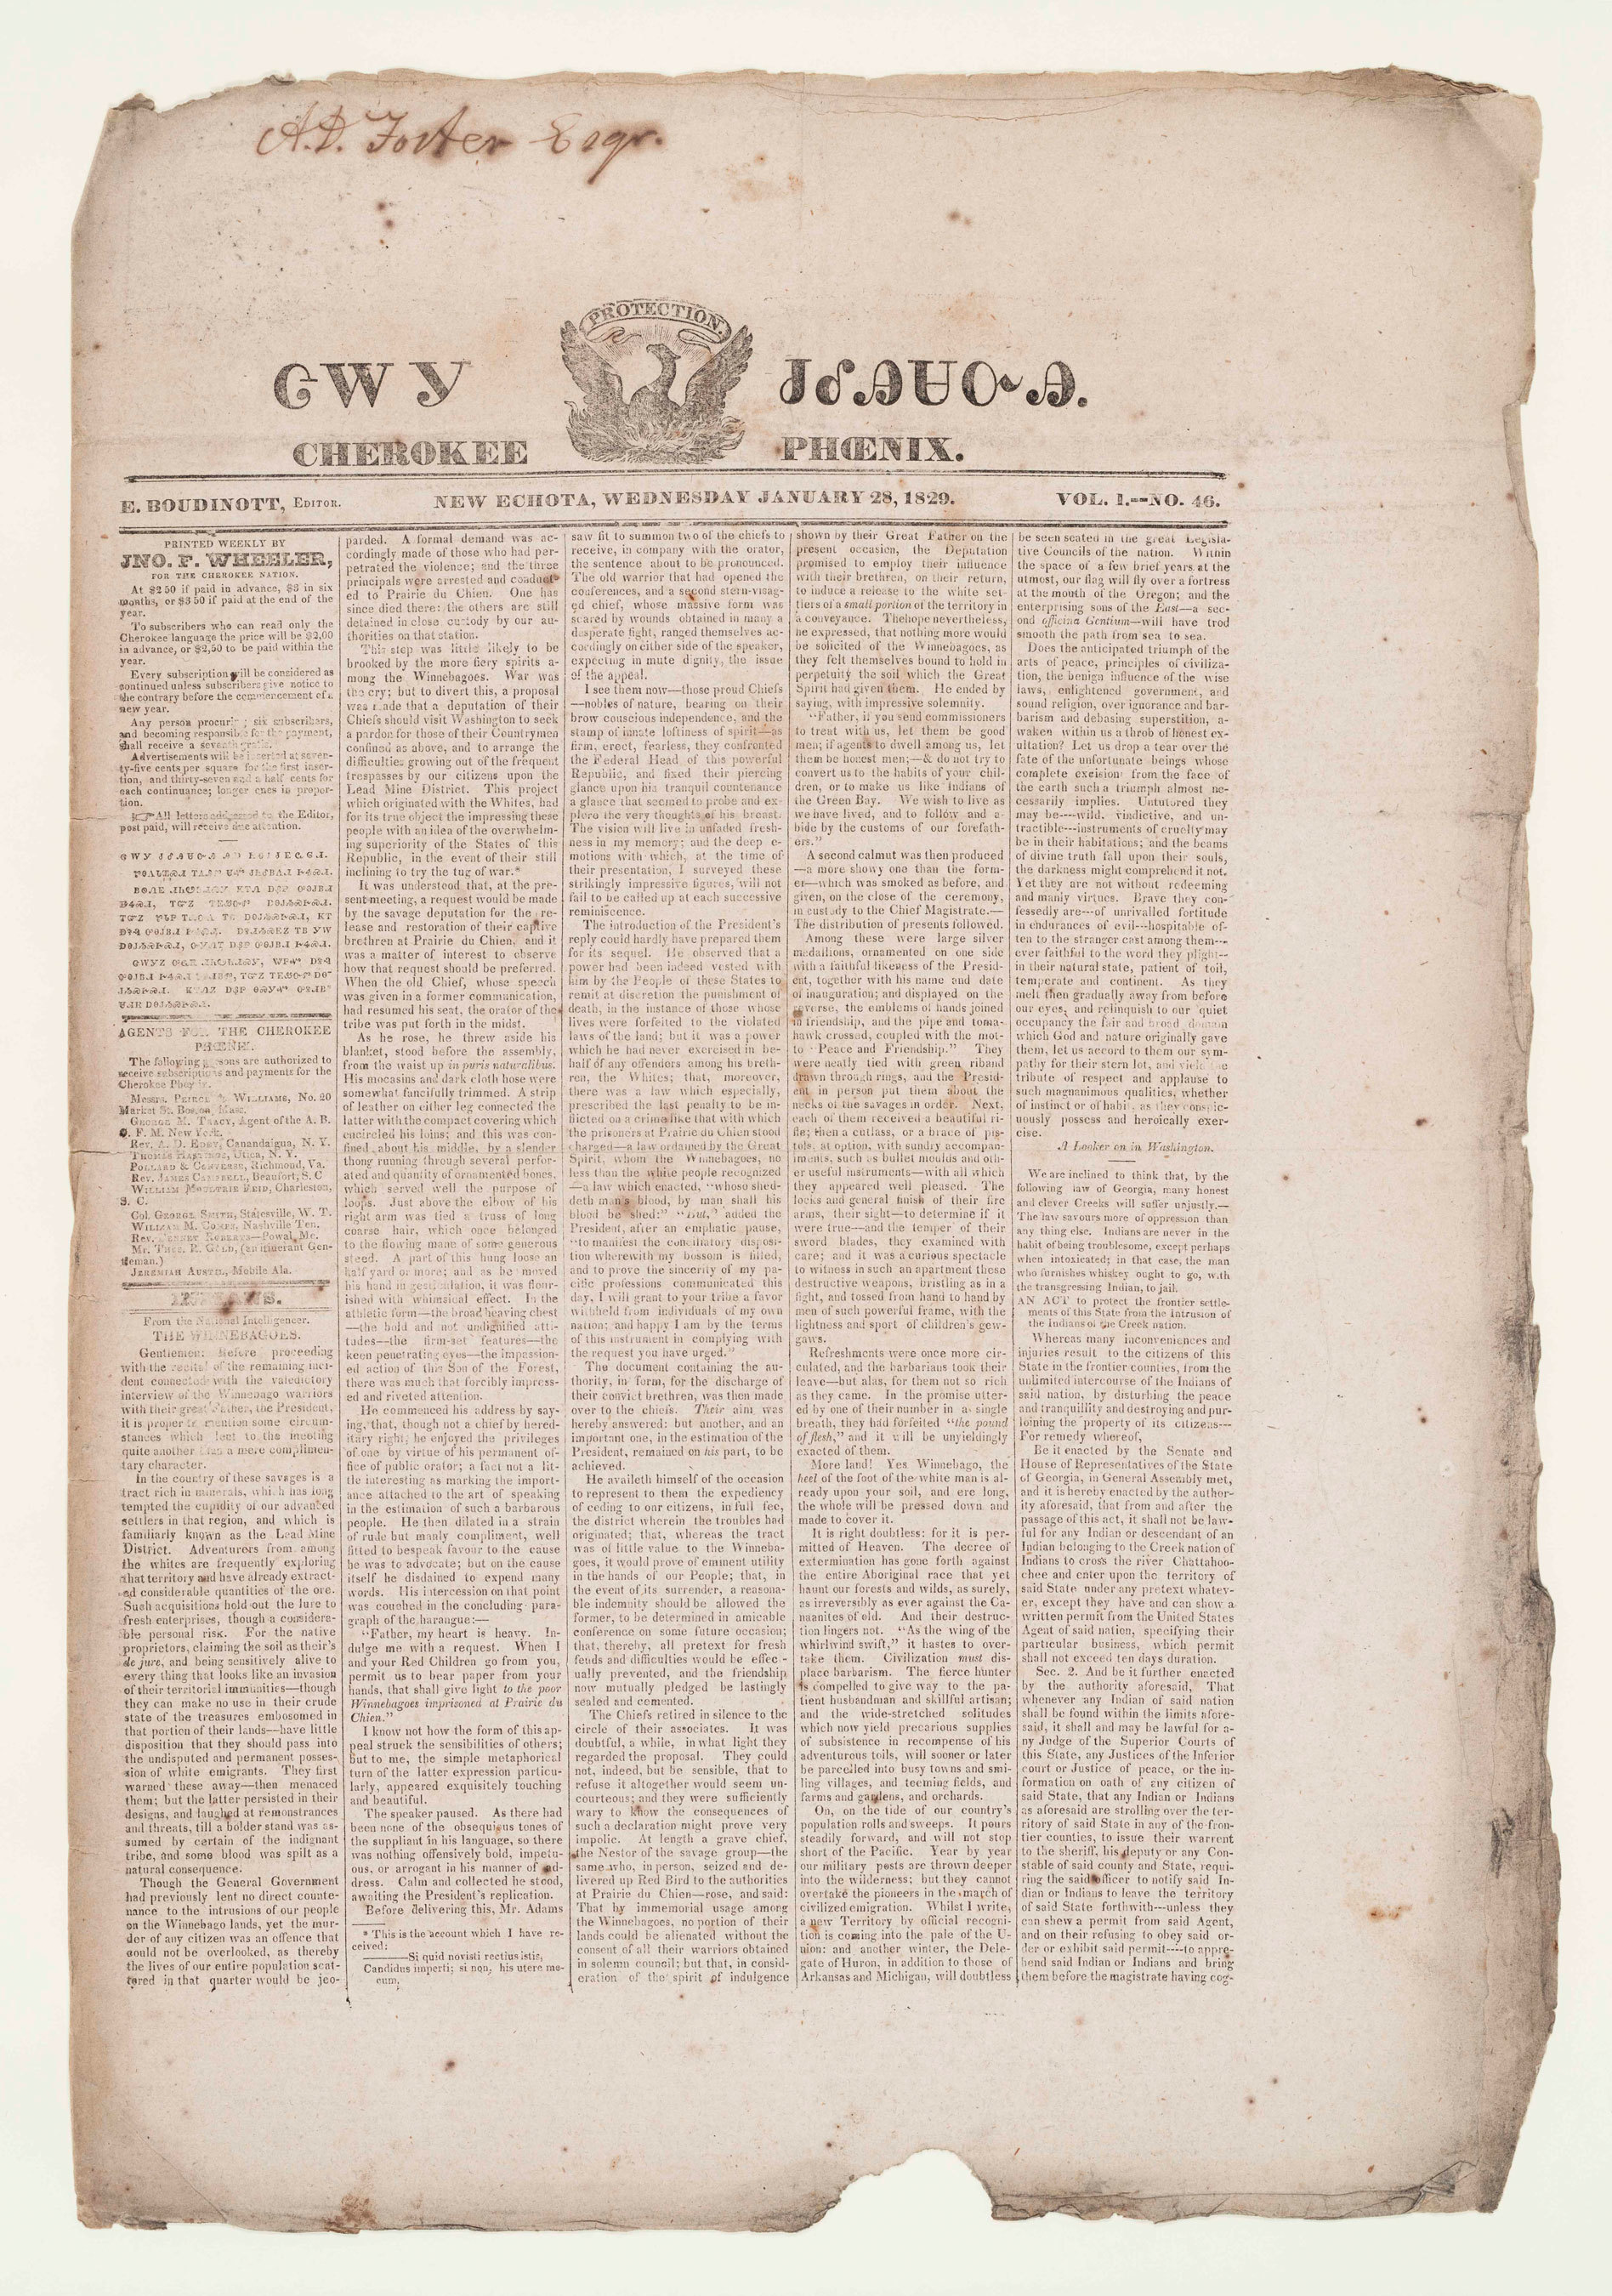 The Cherokee Phoenix -- the first Native American newspaper -- was launched in 1828 in New Echota, Ga. Publisher Elias Boudinot, born "Buck Deer," hoped for a time when "all the Indian tribes of America shall arise, Phoenix-like … and when the terms 'war whoop,' 'scalping knife' and the like shall become obsolete." Today, the Cherokee Phoenix is published monthly in print and online. Image credit: Newseum Collection (PRNewsFoto/Newseum)